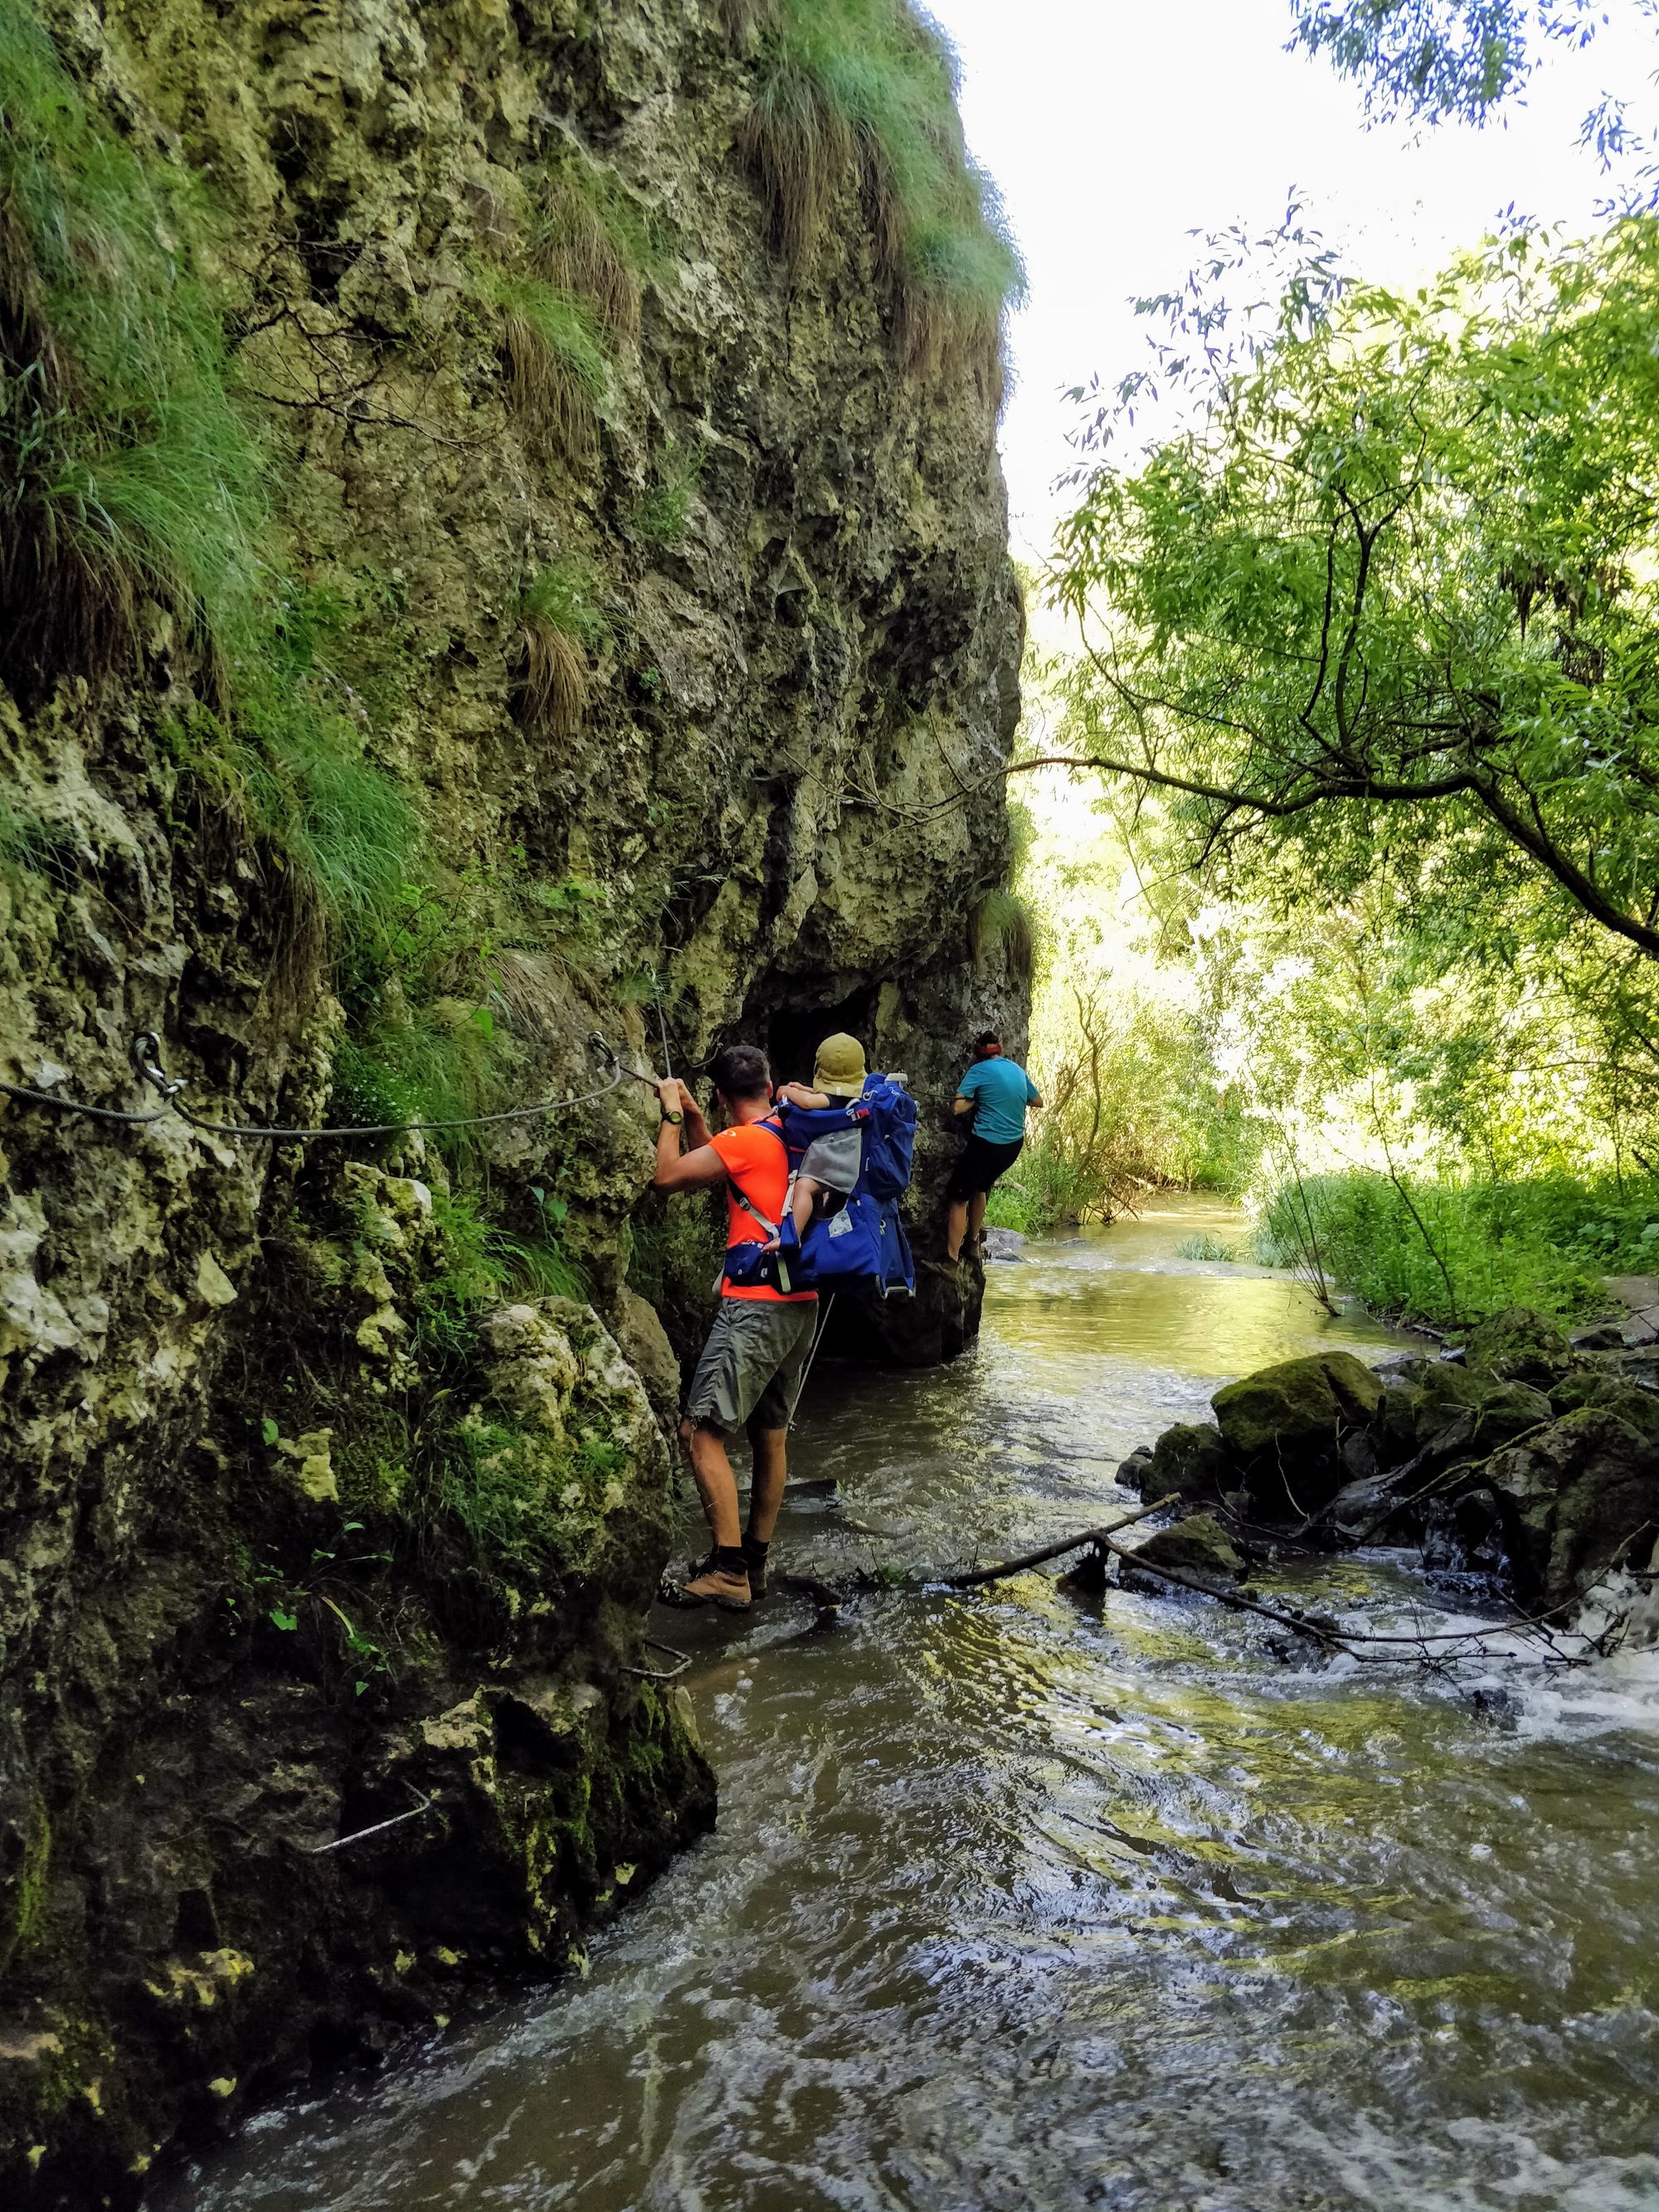 Escaping the heatwave at Tureni Gorge - June 2021